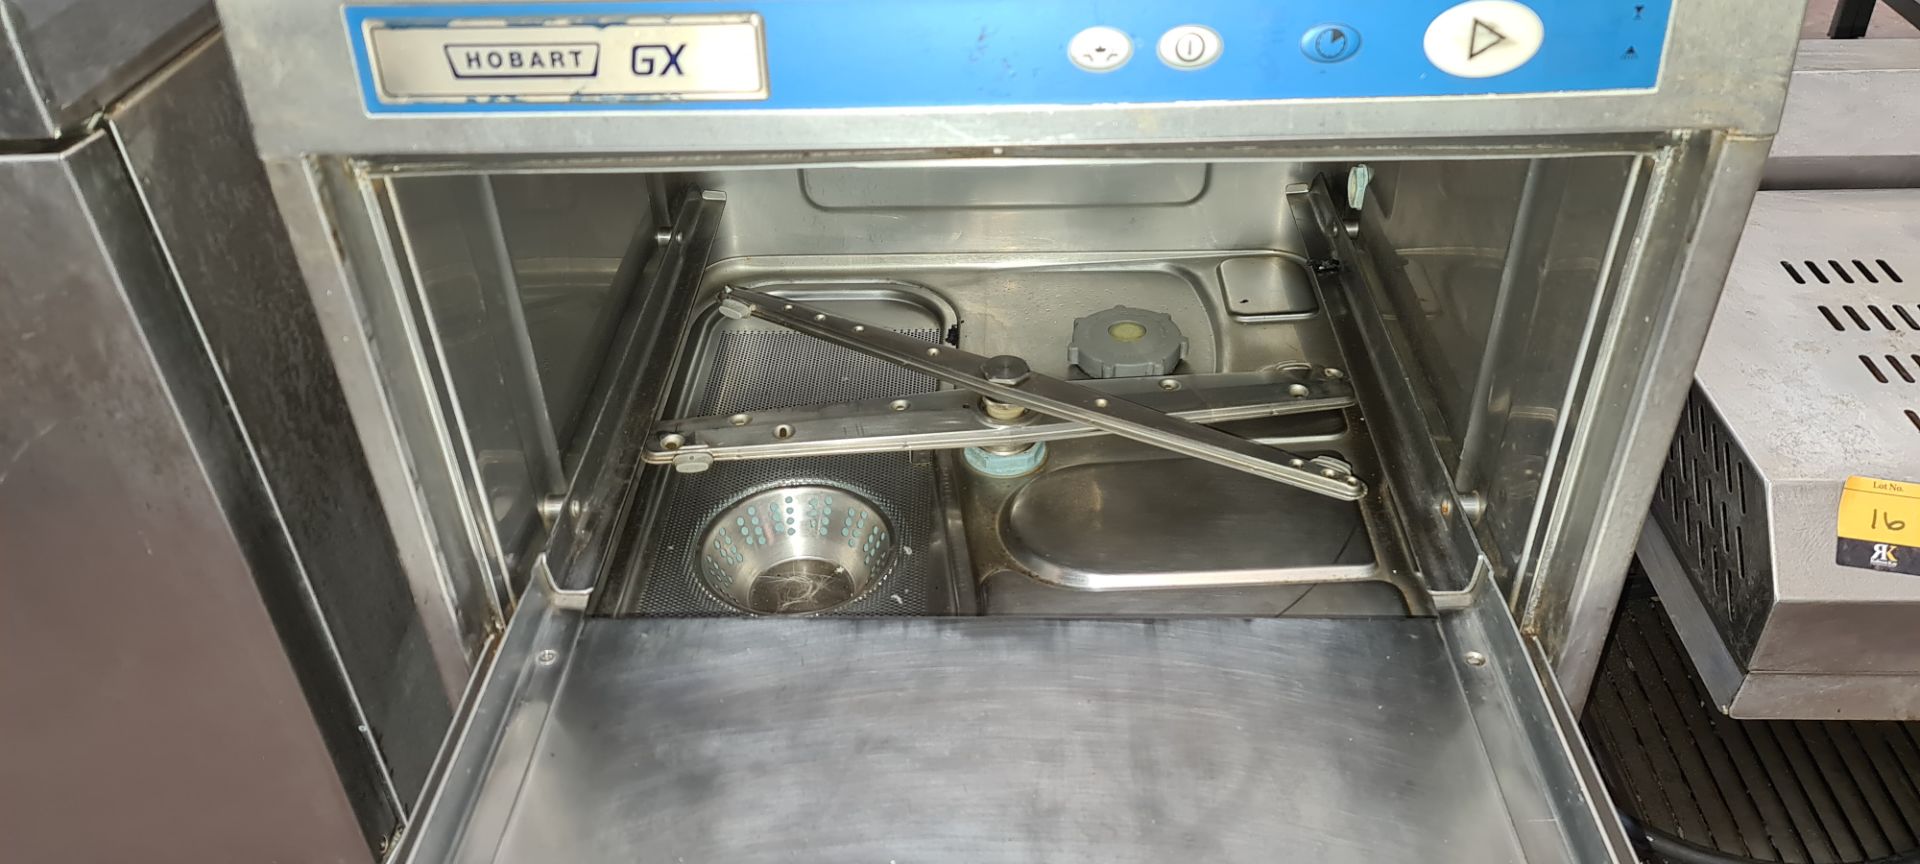 Hobart GX stainless steel under counter glasswasher model GXS-73 - Image 4 of 4